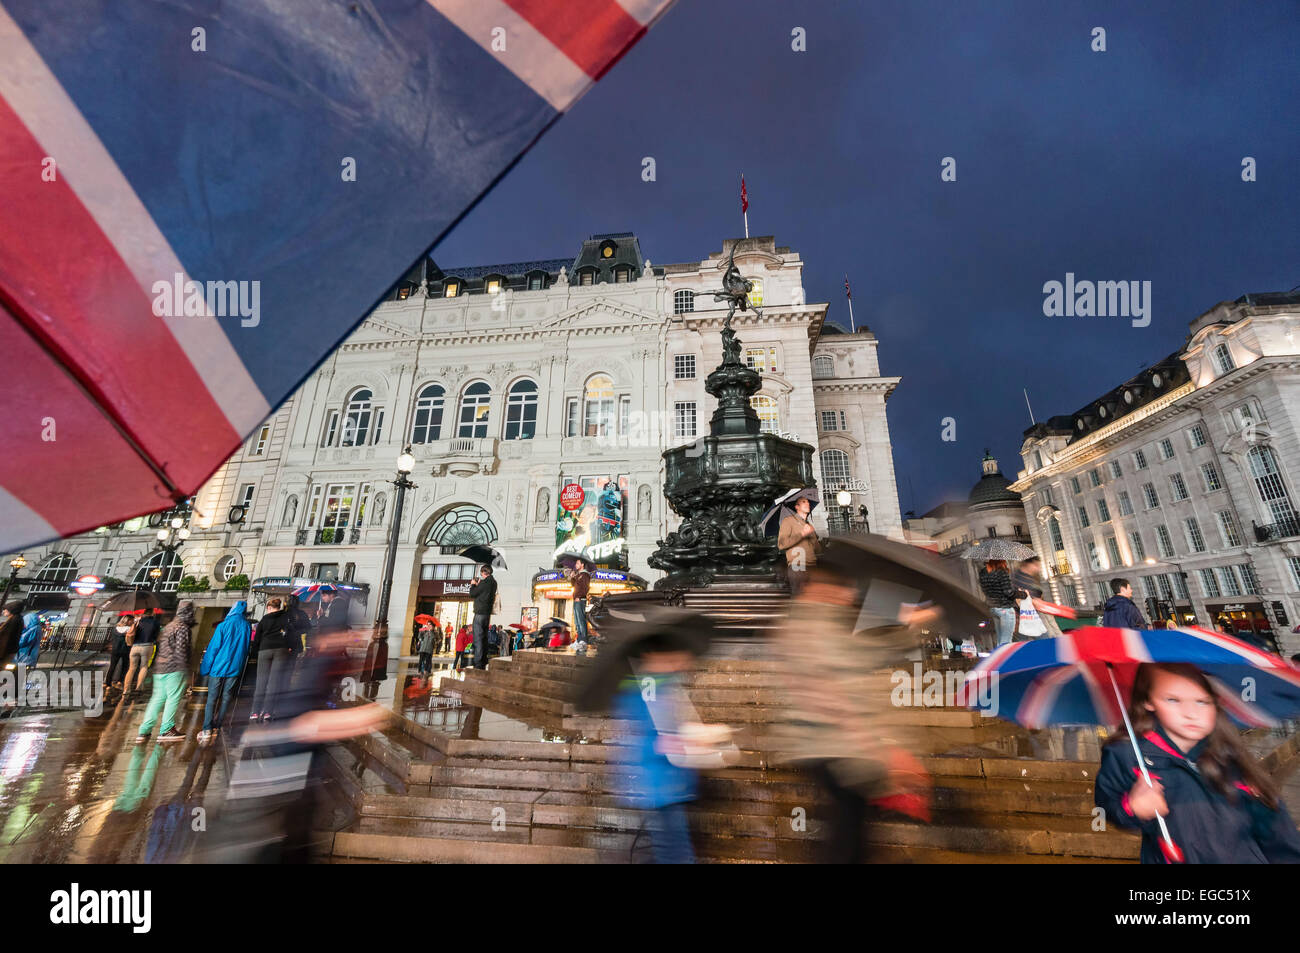 People with Umbrellas at Piccadilly Circus at night, London, UK Stock Photo